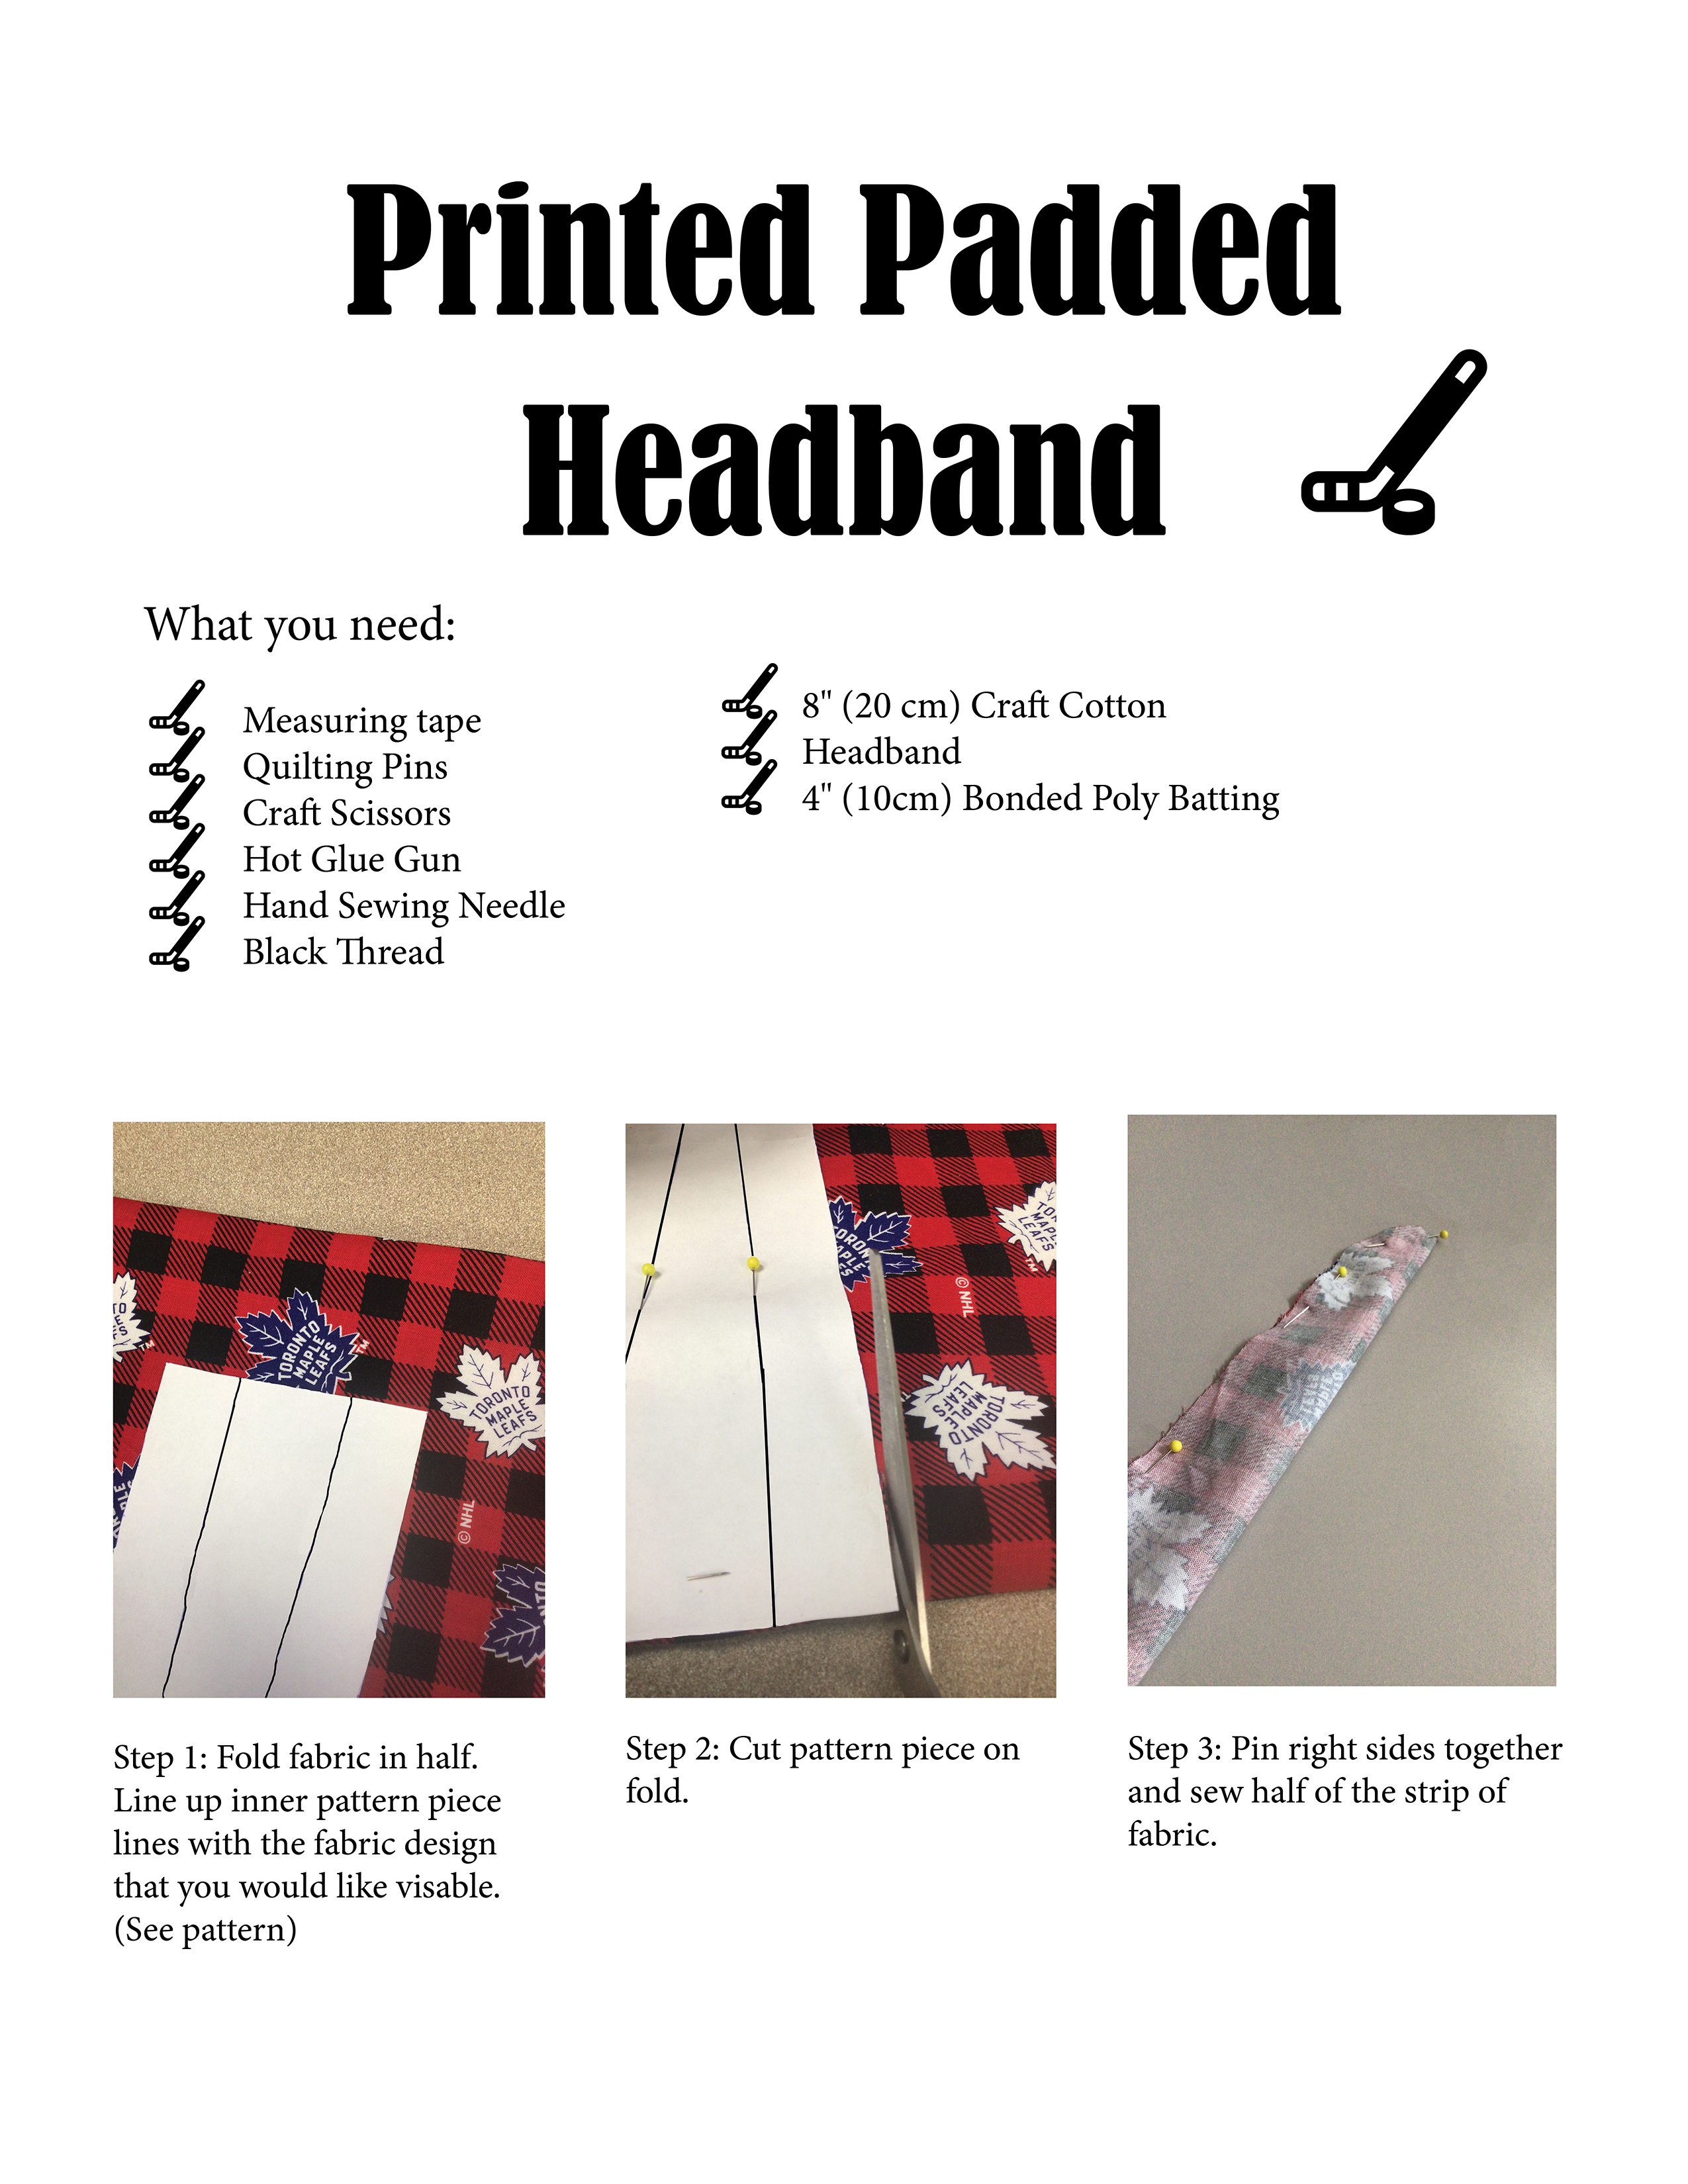 First set of steps to creating your own printed padded headband